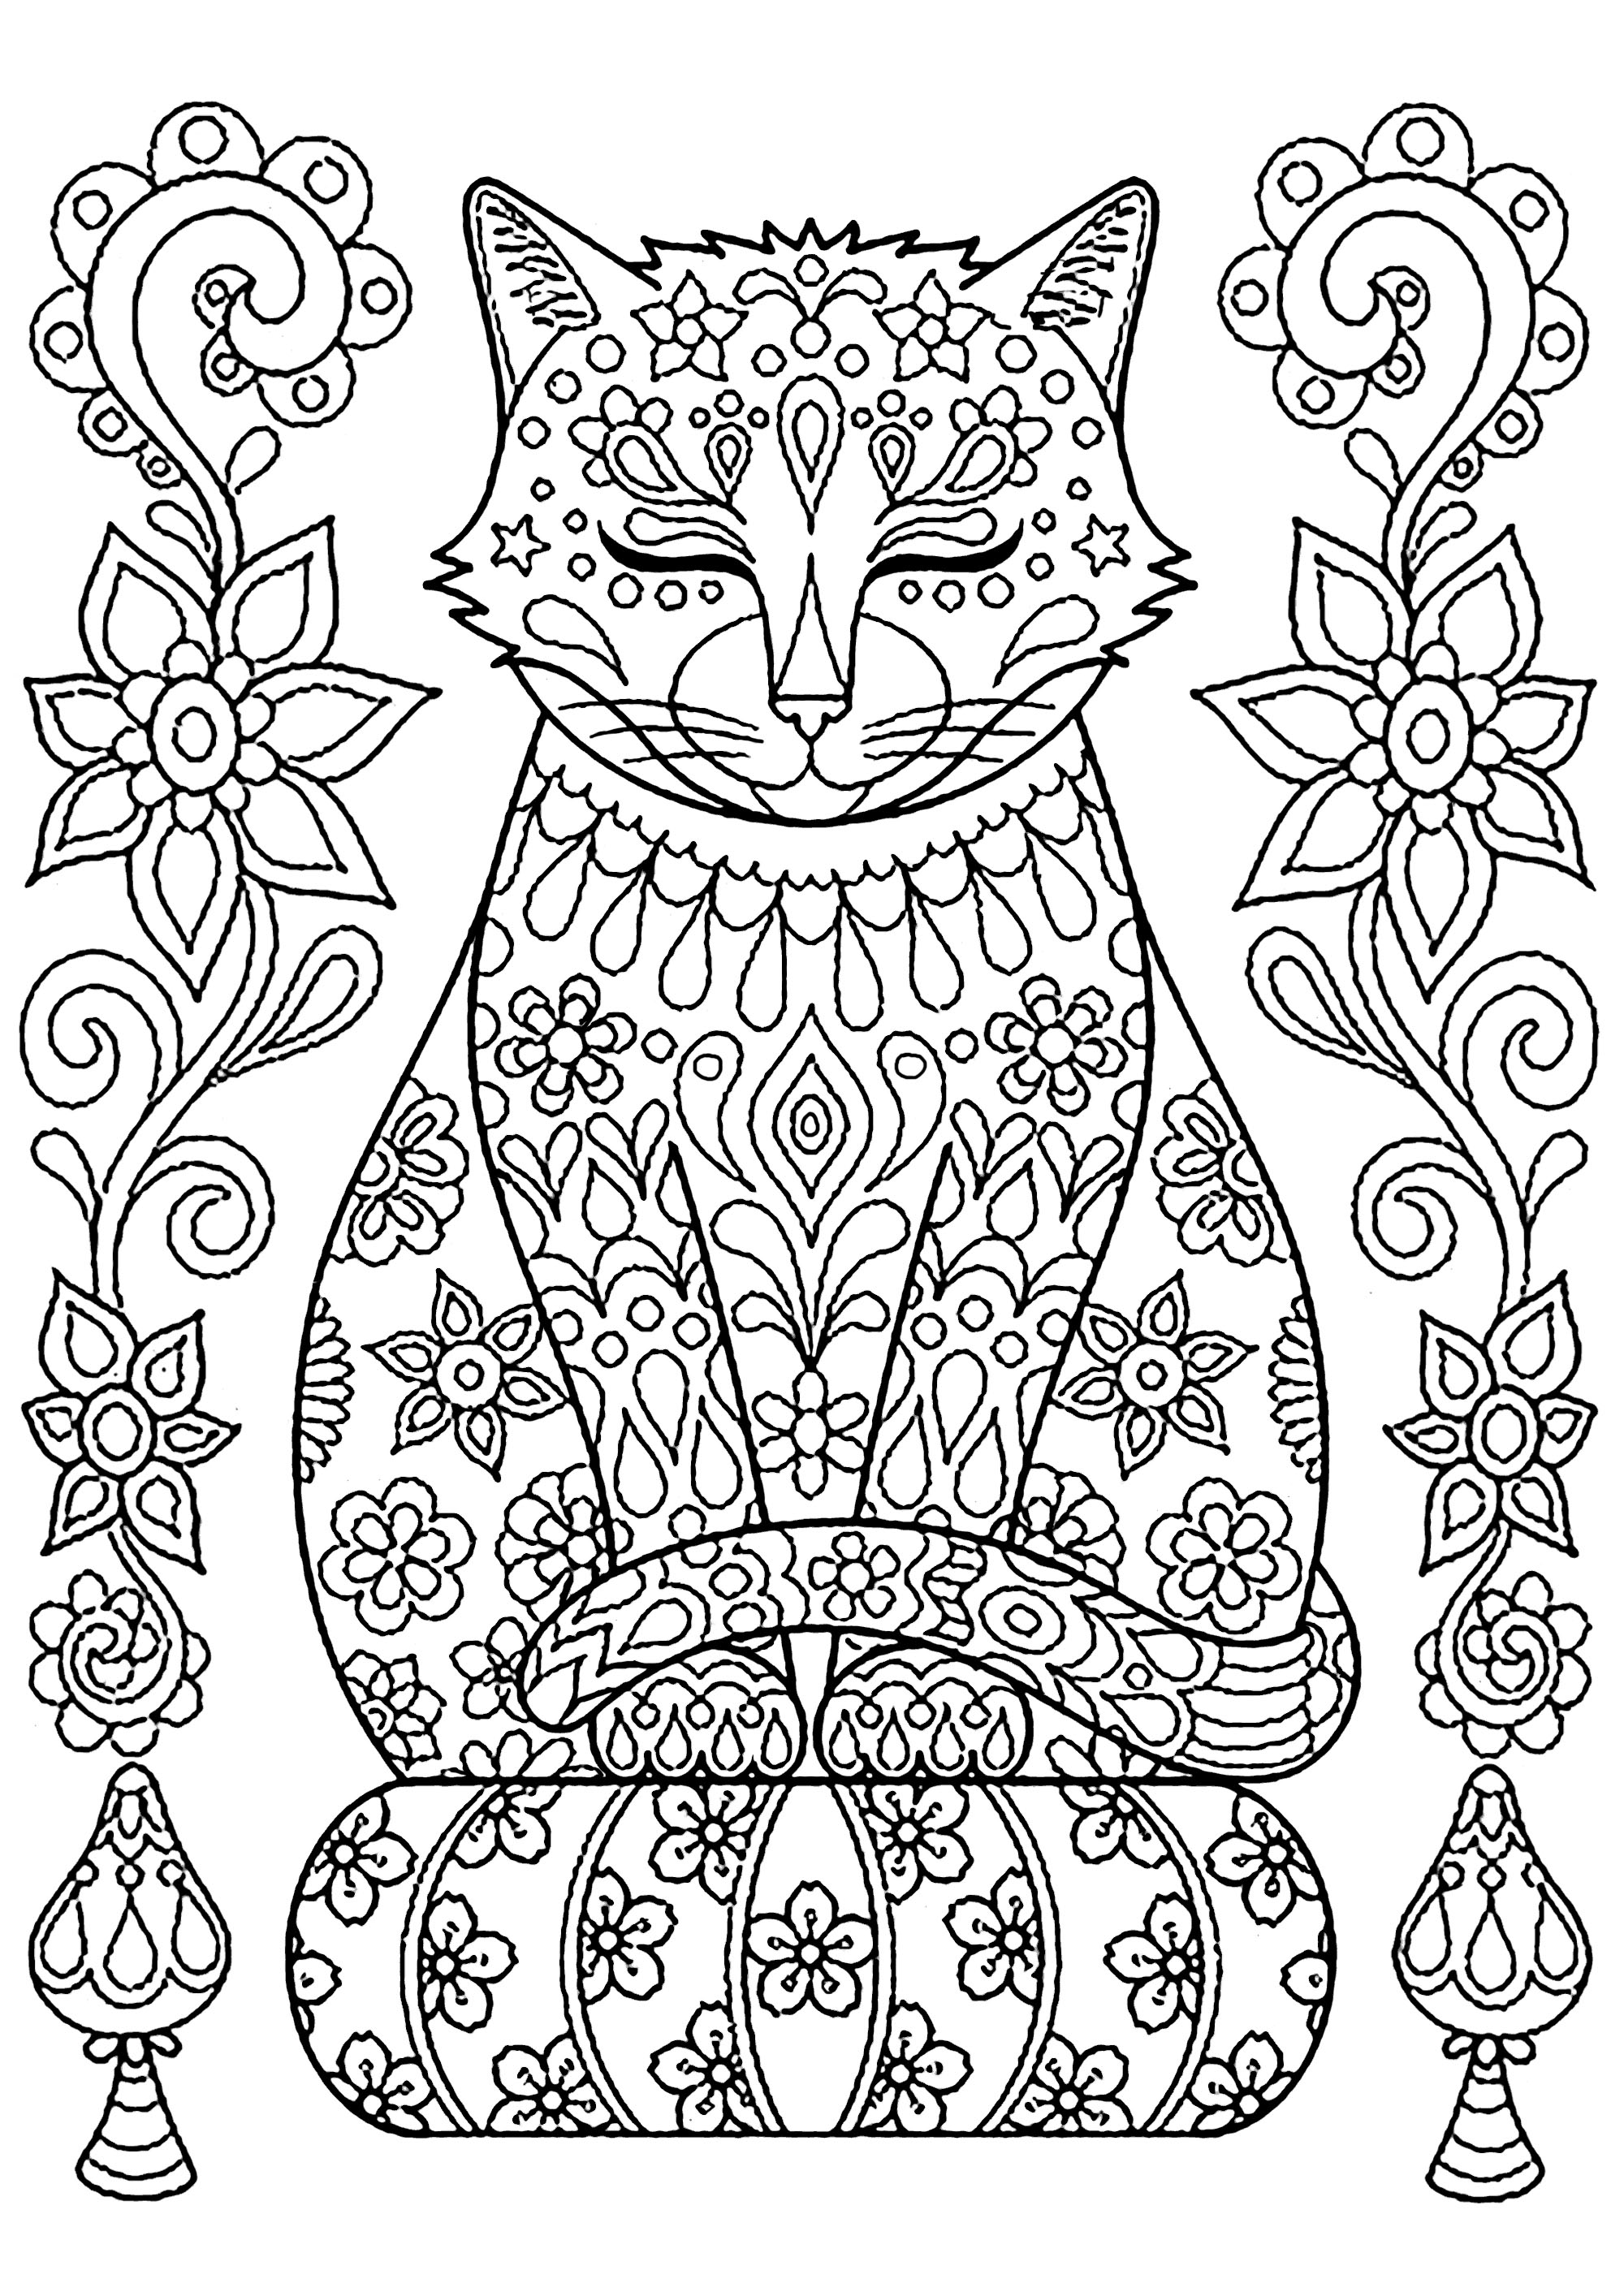 Cute cat on pillow with flowers - Cats Adult Coloring Pages